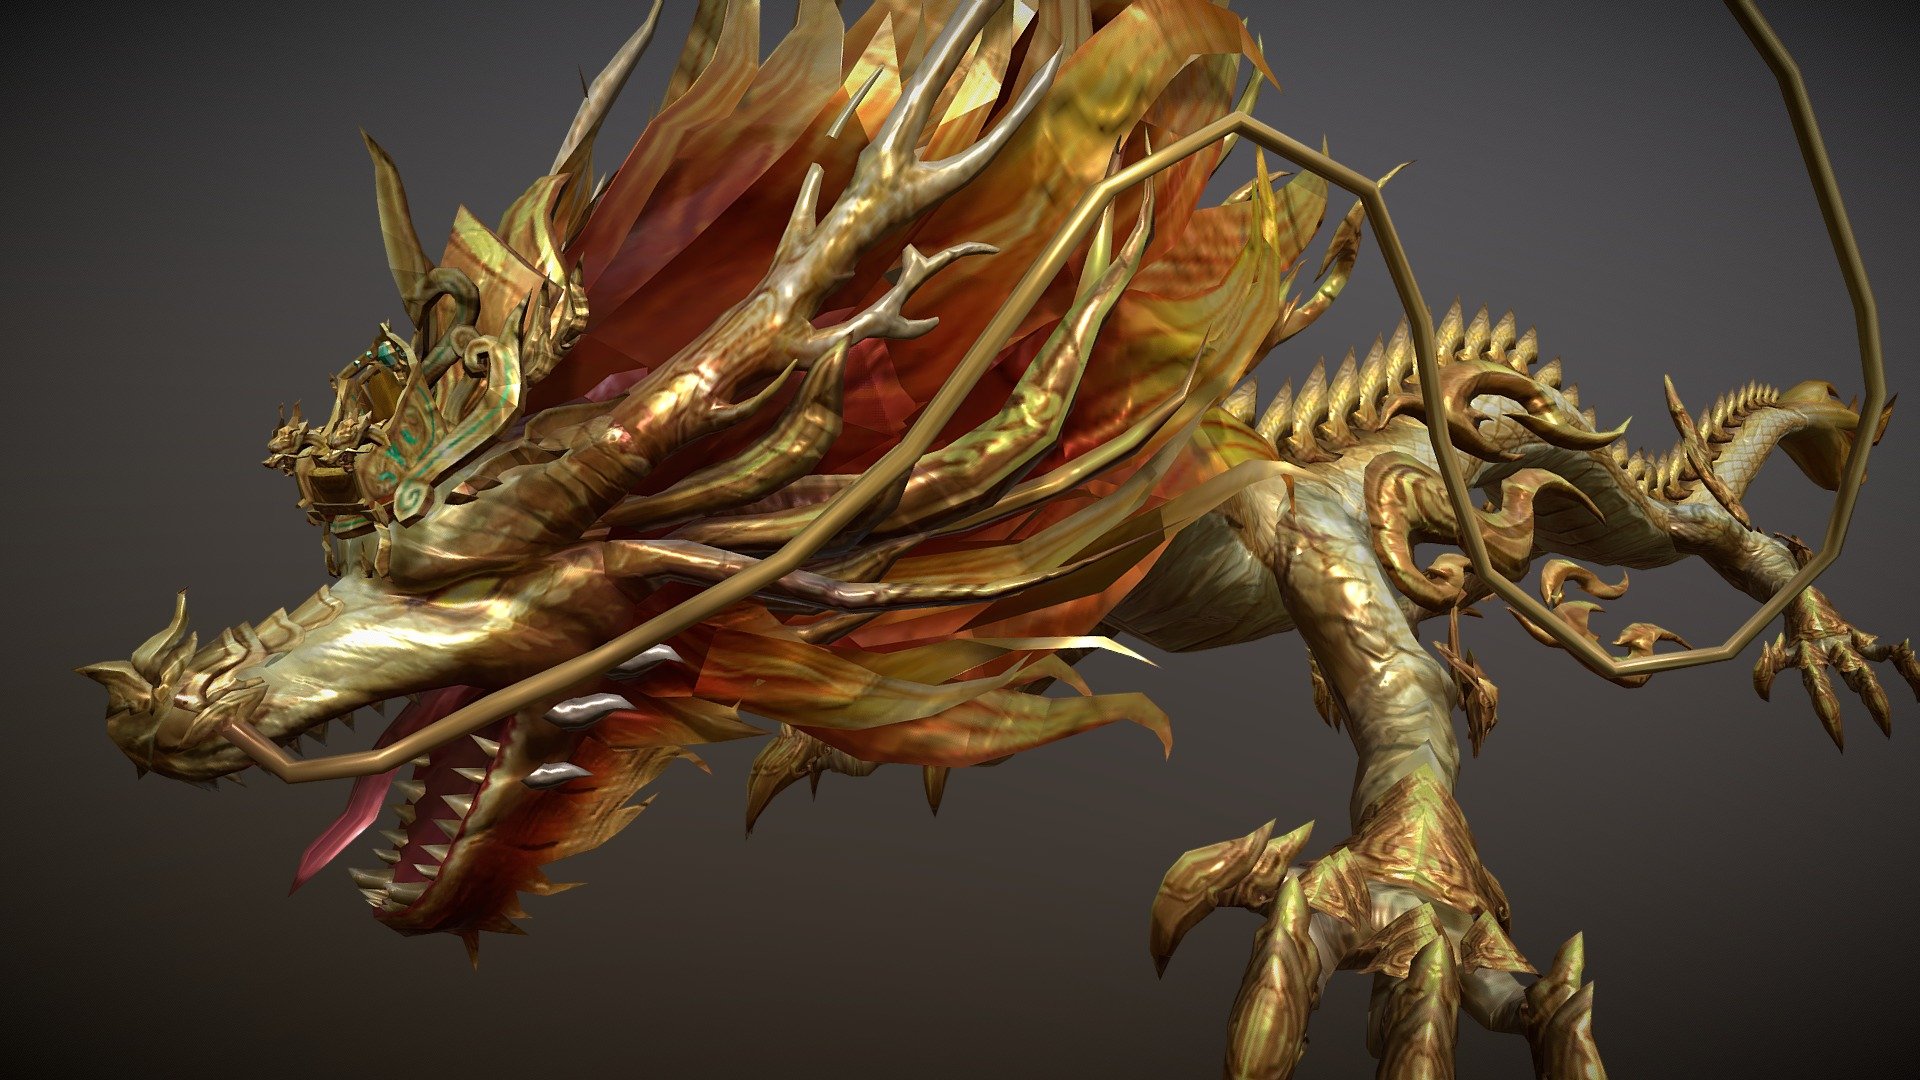 High-quality and detailed Chinese dragon 3d model.

Perfect for games, scenes or renders.

Enjoy!

Dragons are deeply rooted in the Chinese culture. The Chinese often consider themselves, &lsquo;the descendants of the dragon.'
Nobody really knows where the dragon comes from. The dragon looks like a combination of many animals. For the Chinese people, Dragons were described visually as a composite of parts from nine animals: The horns of a deer; the head of a camel; the eyes of a devil; the neck of a snake; the abdomen of a large cockle; the scales of a carp; the claws of an eagle; the paws of a tiger; and the ears of an ox - Chinese Dragon - Buy Royalty Free 3D model by Ryuism (@Ryuism_) 3d model